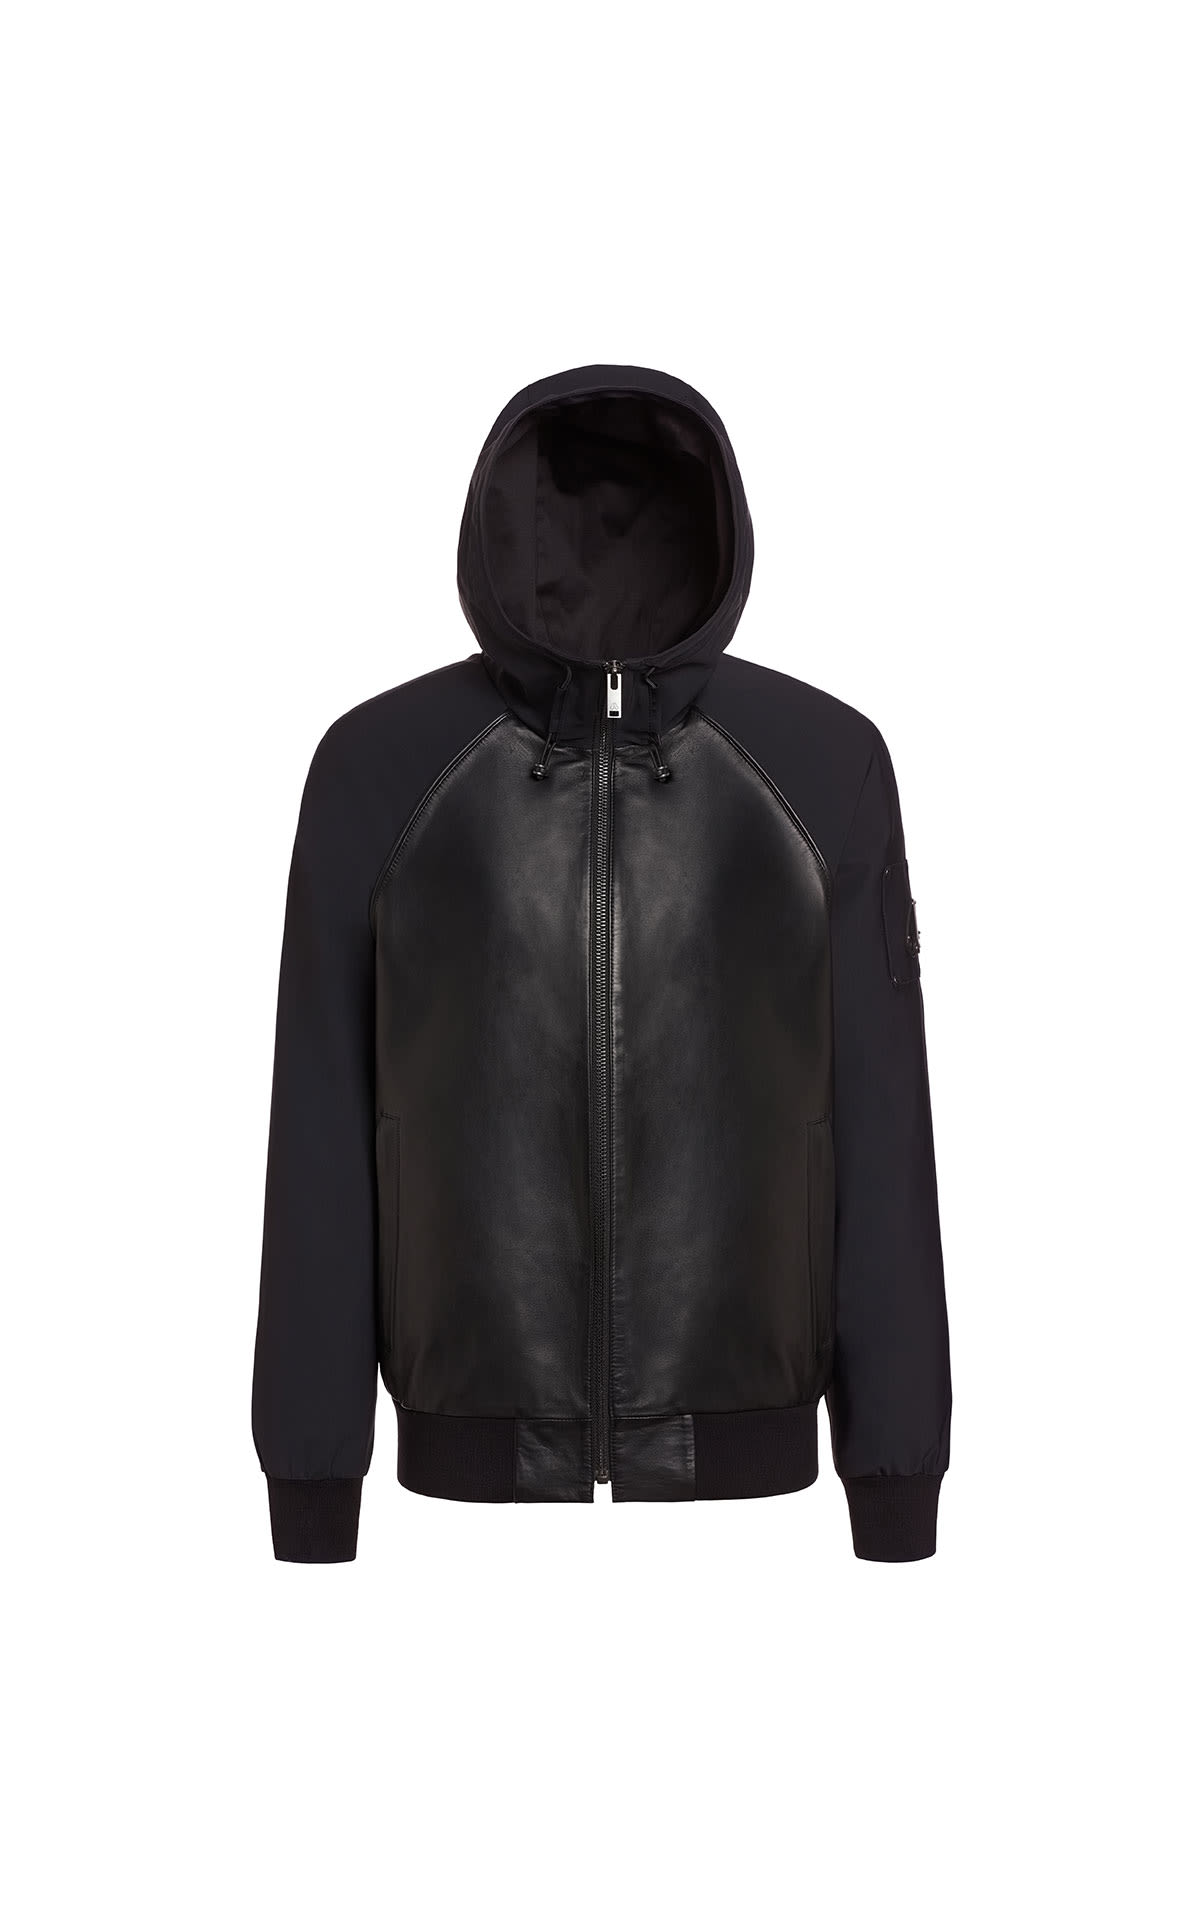 Moose Knuckles Gulf breeze bomber from Bicester Village